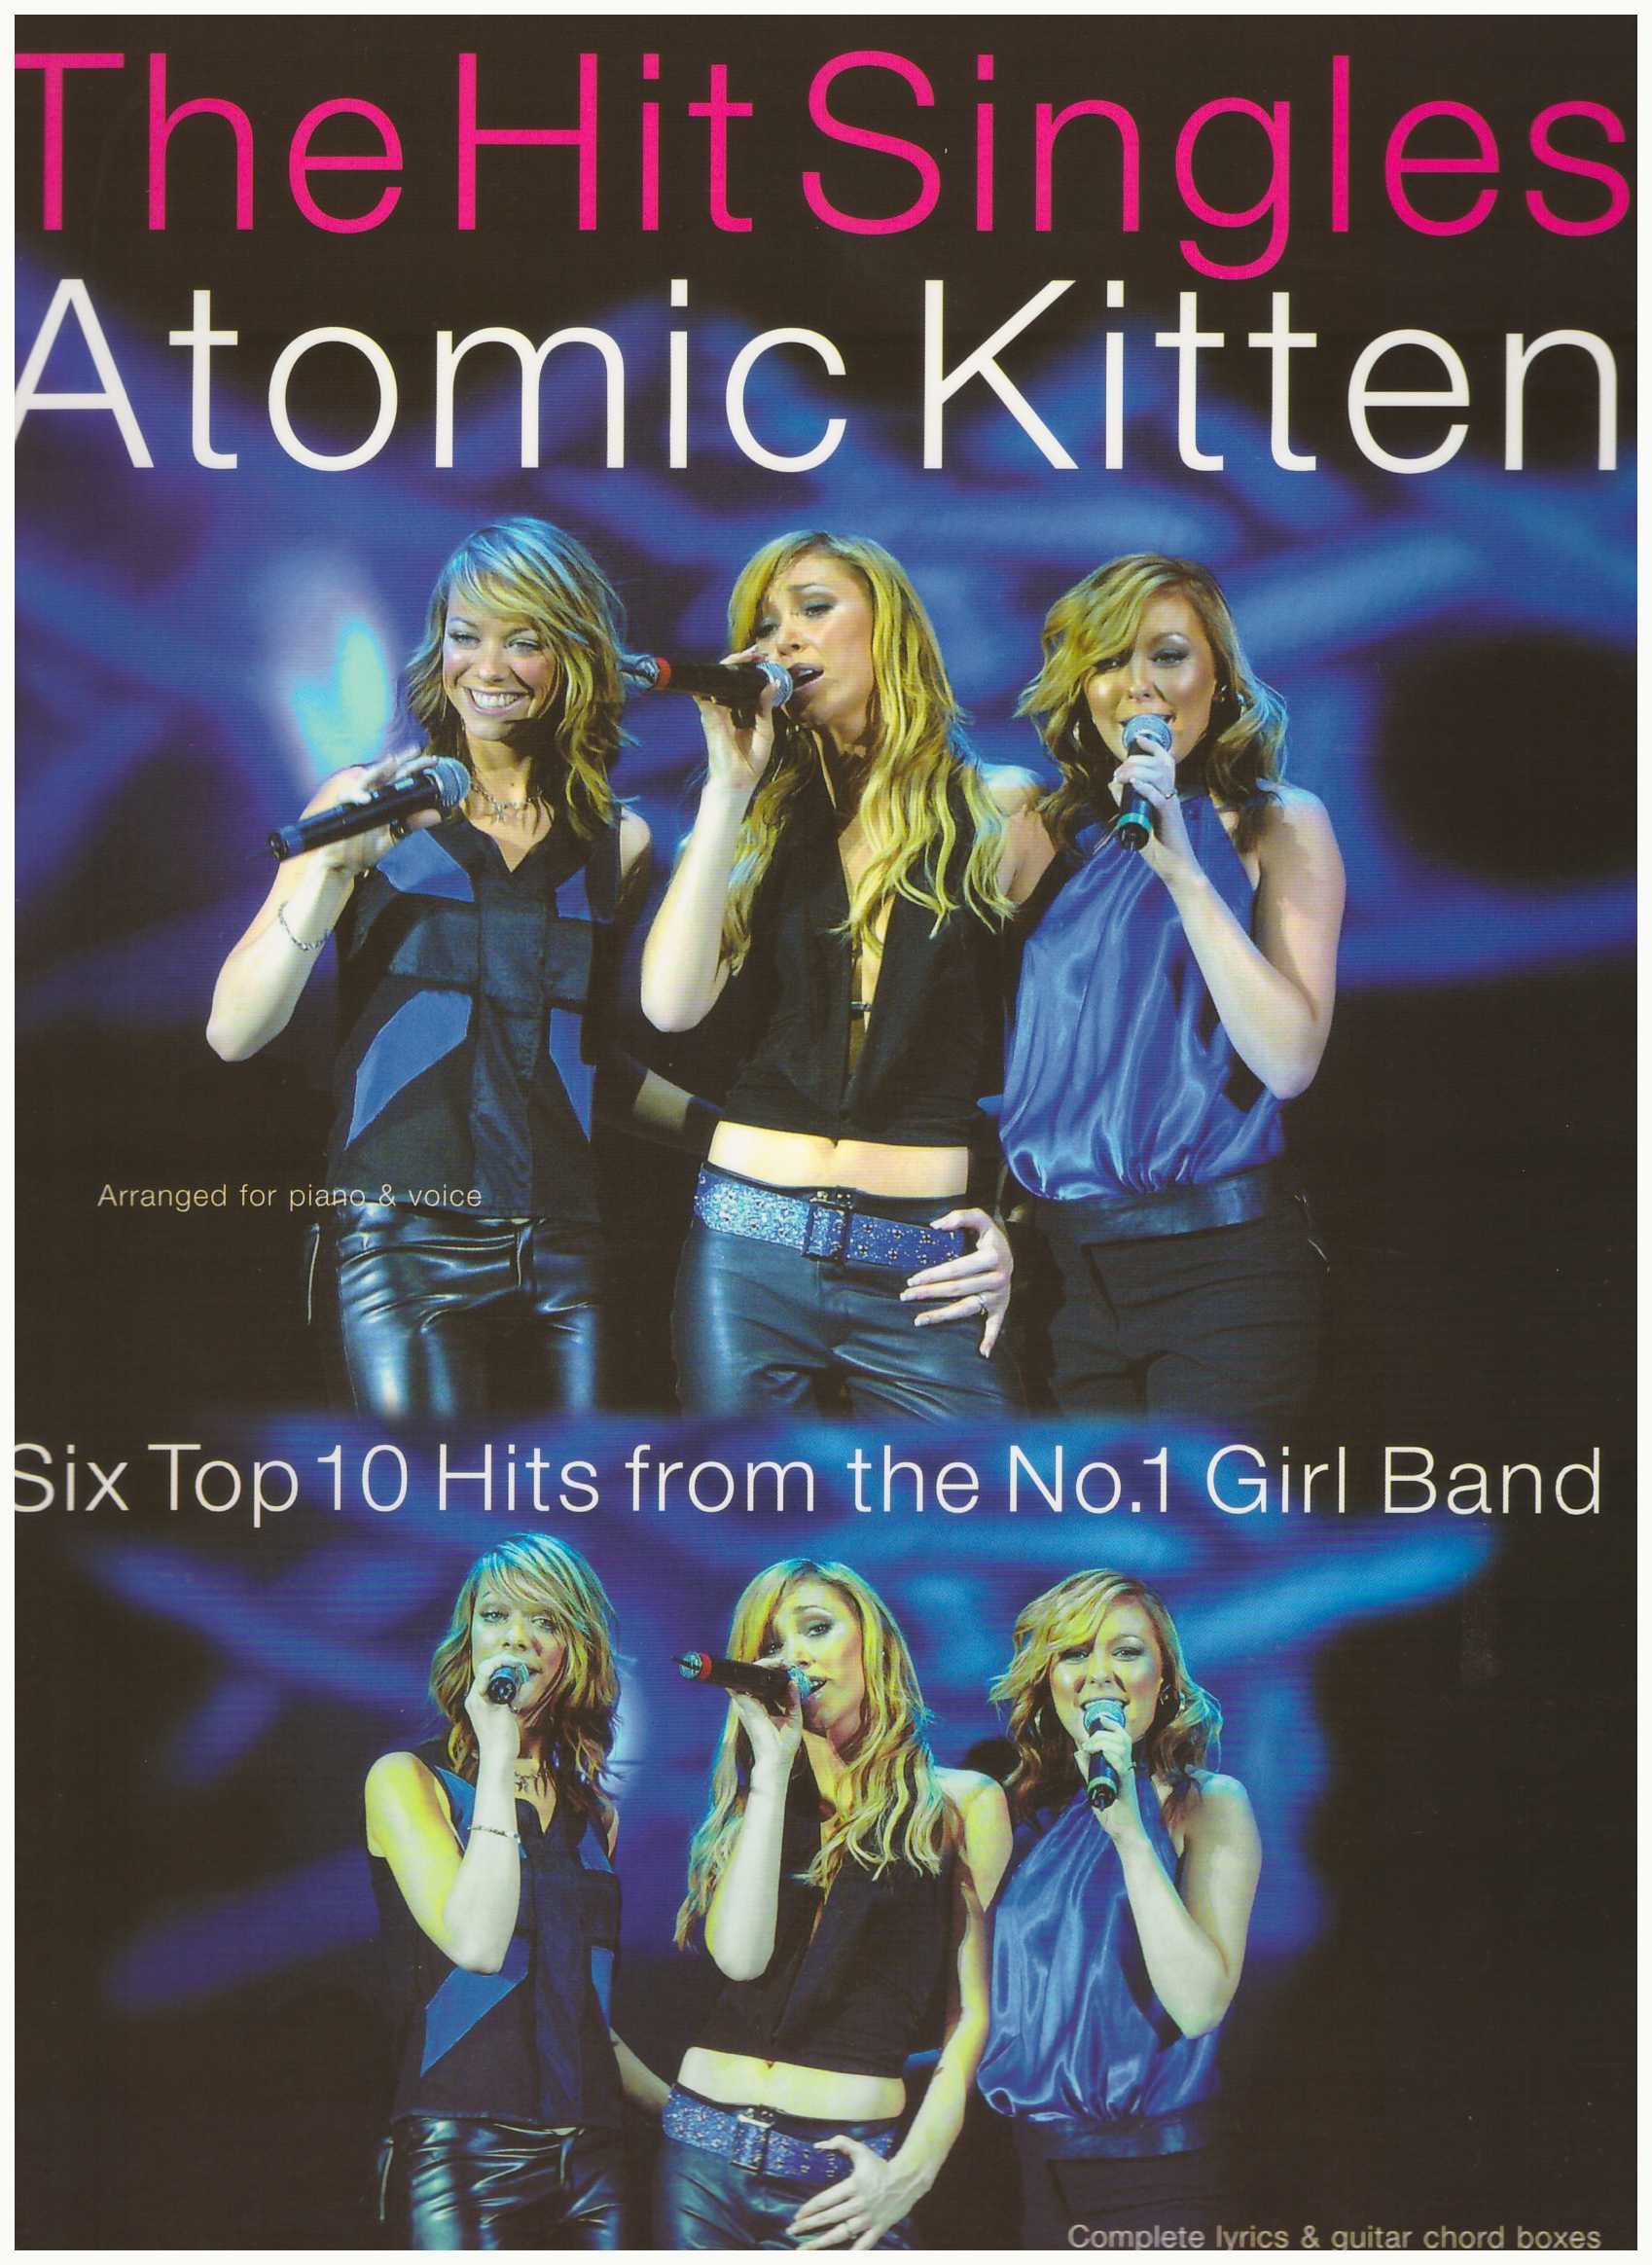 The Hit Singles Atomic Kitten / PVG Book / Piano Book / Pop Song Book / Vocal Book / Guitar Book 